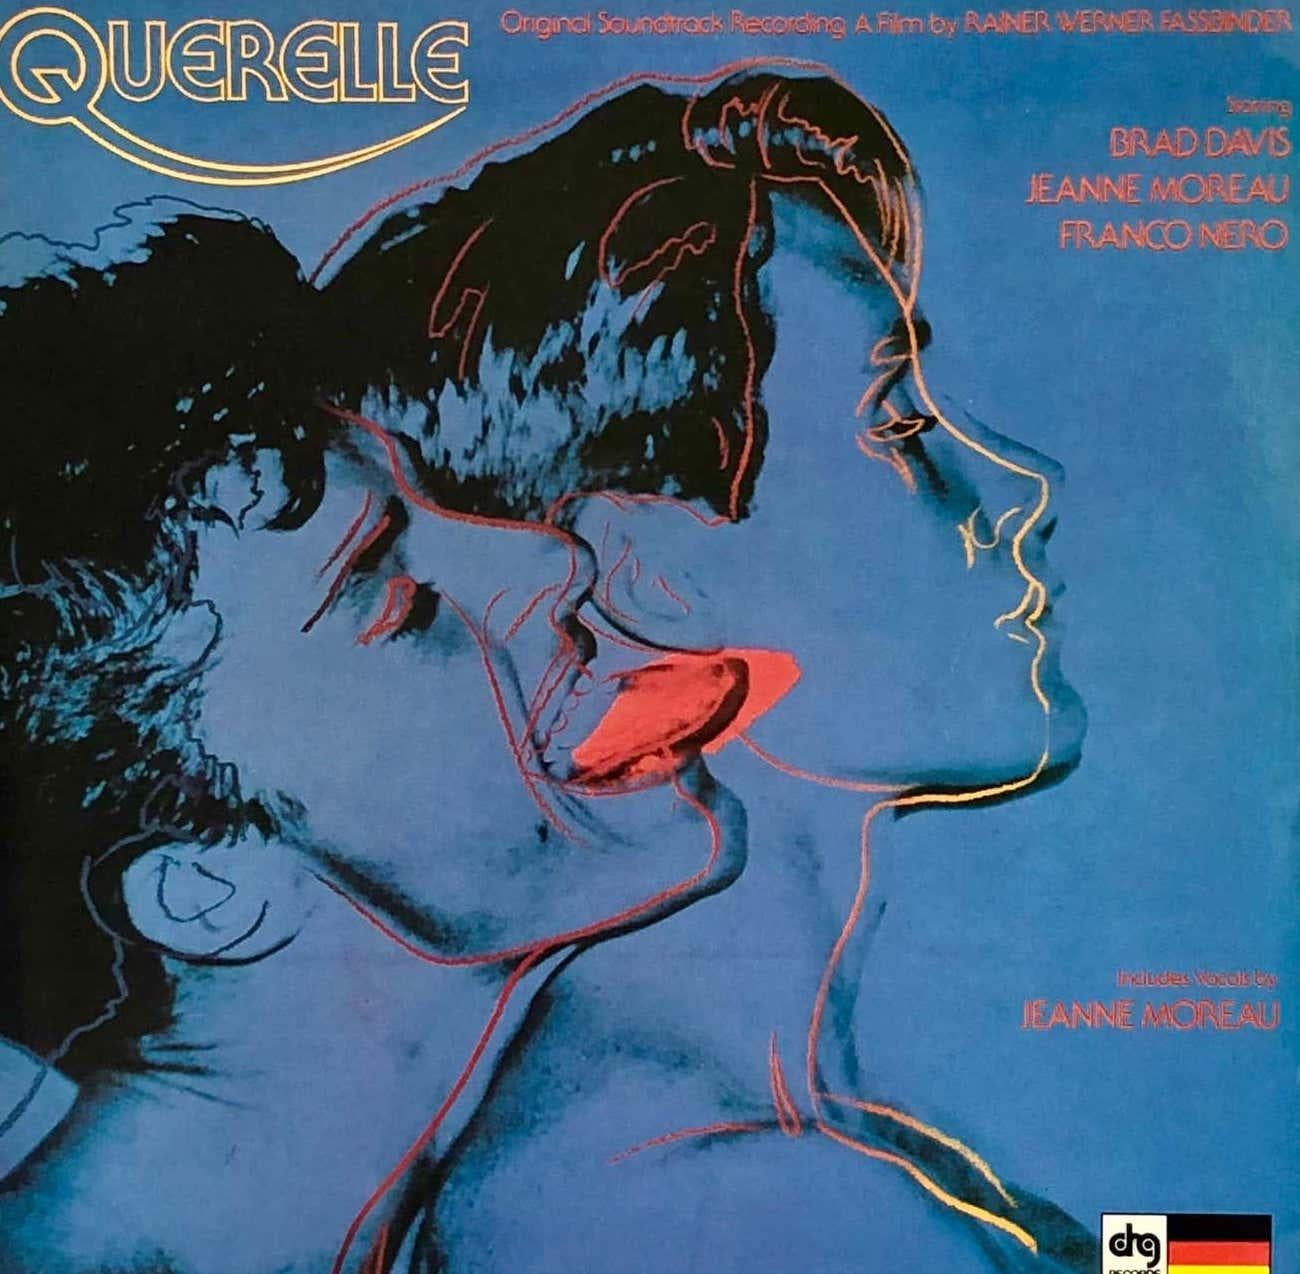 1982 1st pressing, Querelle vinyl album featuring Original Cover Art by Andy Warhol. Catalogue Raisonne: Paul Marechal: Andy Warhol, The Complete Commissioned Record Covers. 

Cover: Off-set print of Warhol's original screen print from the same